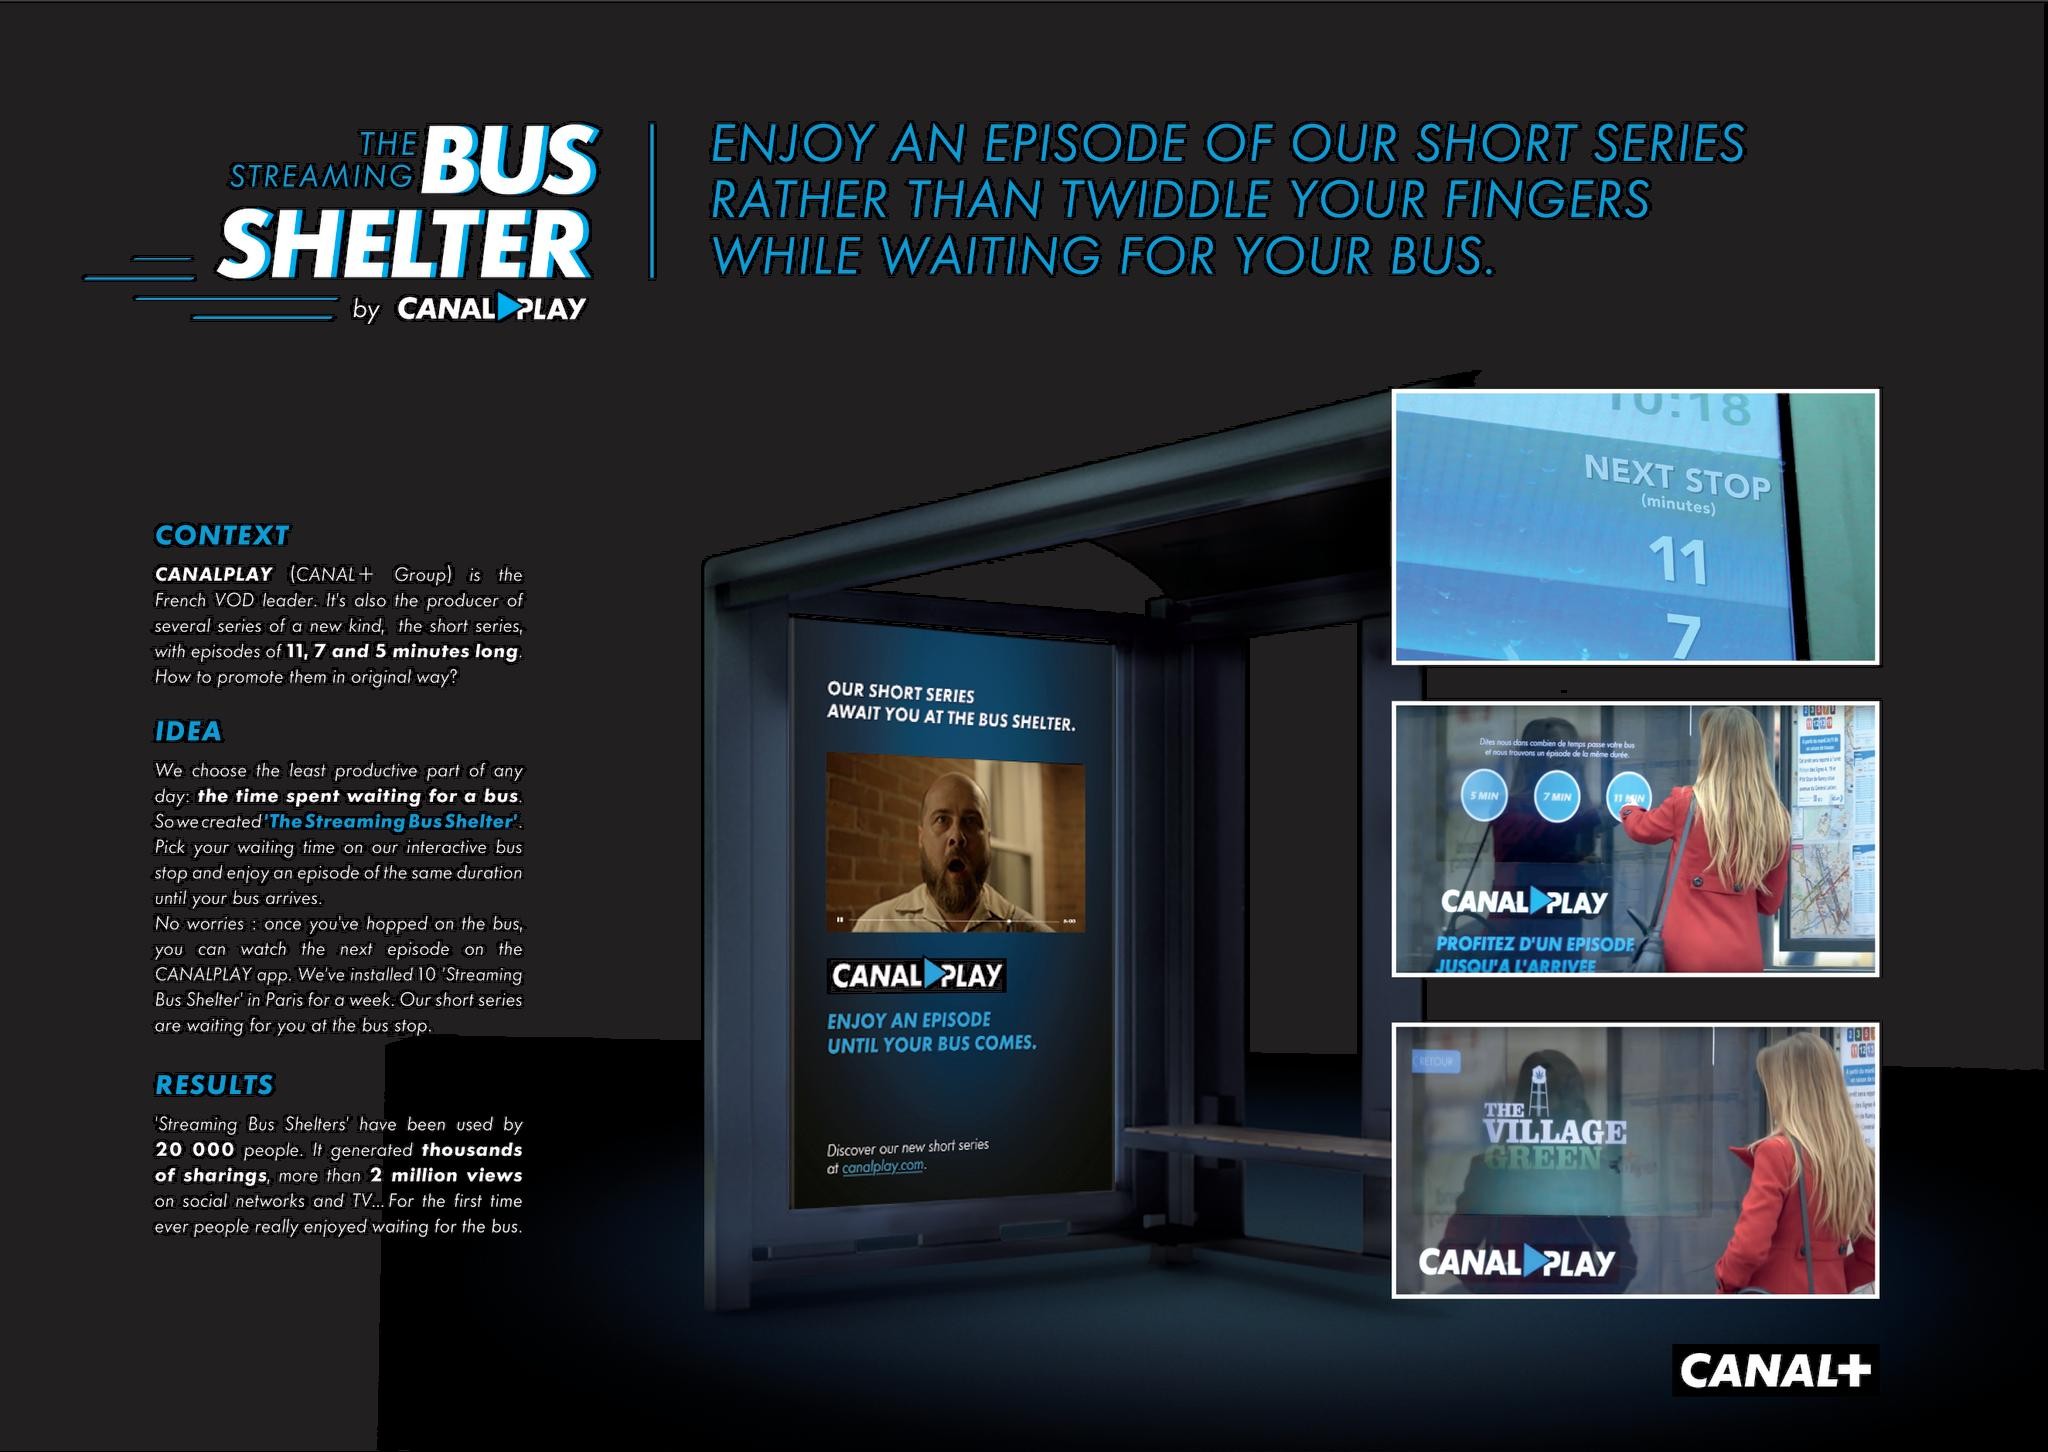 THE STREAMING BUS SHELTER